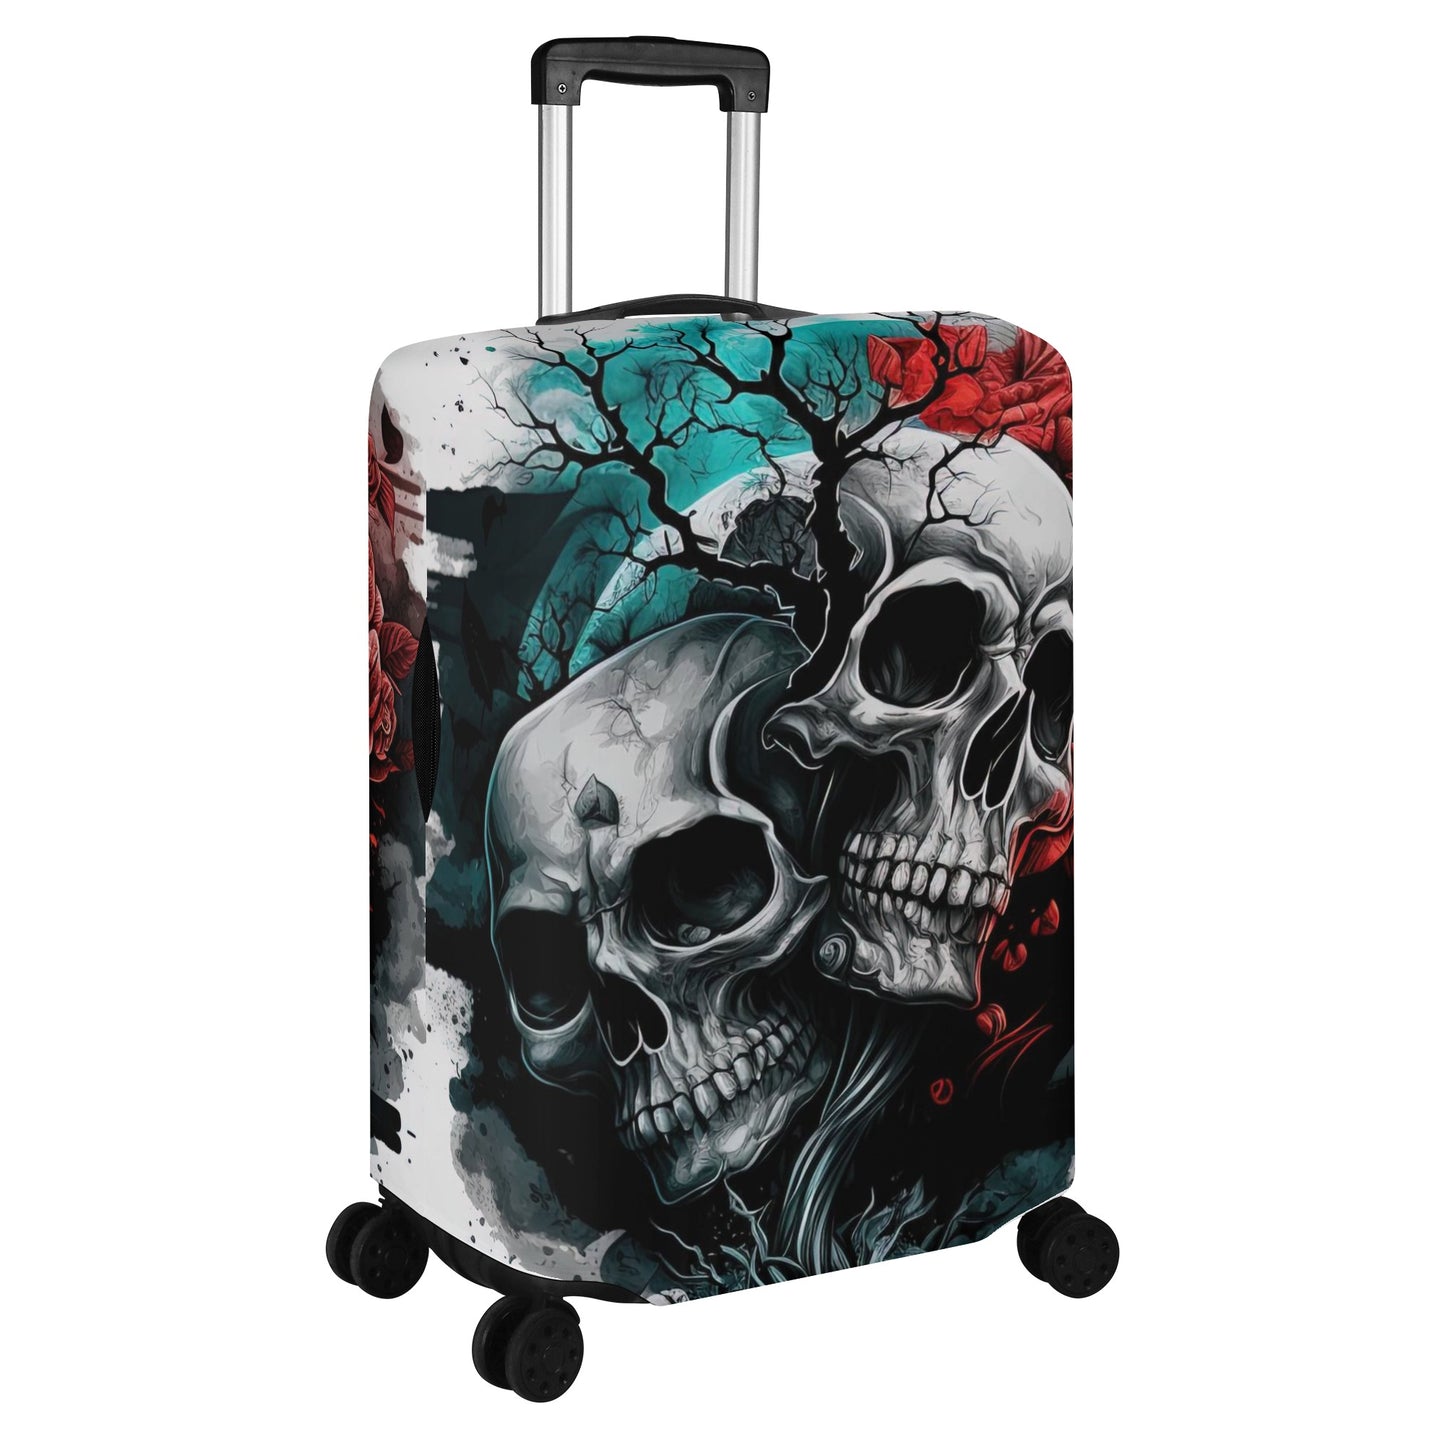 Rose skull suitcase cover, flame skull luggage, skeleton luggage tag, punisher skull suitcase tag, evil suitcase tag, halloween luggage cove